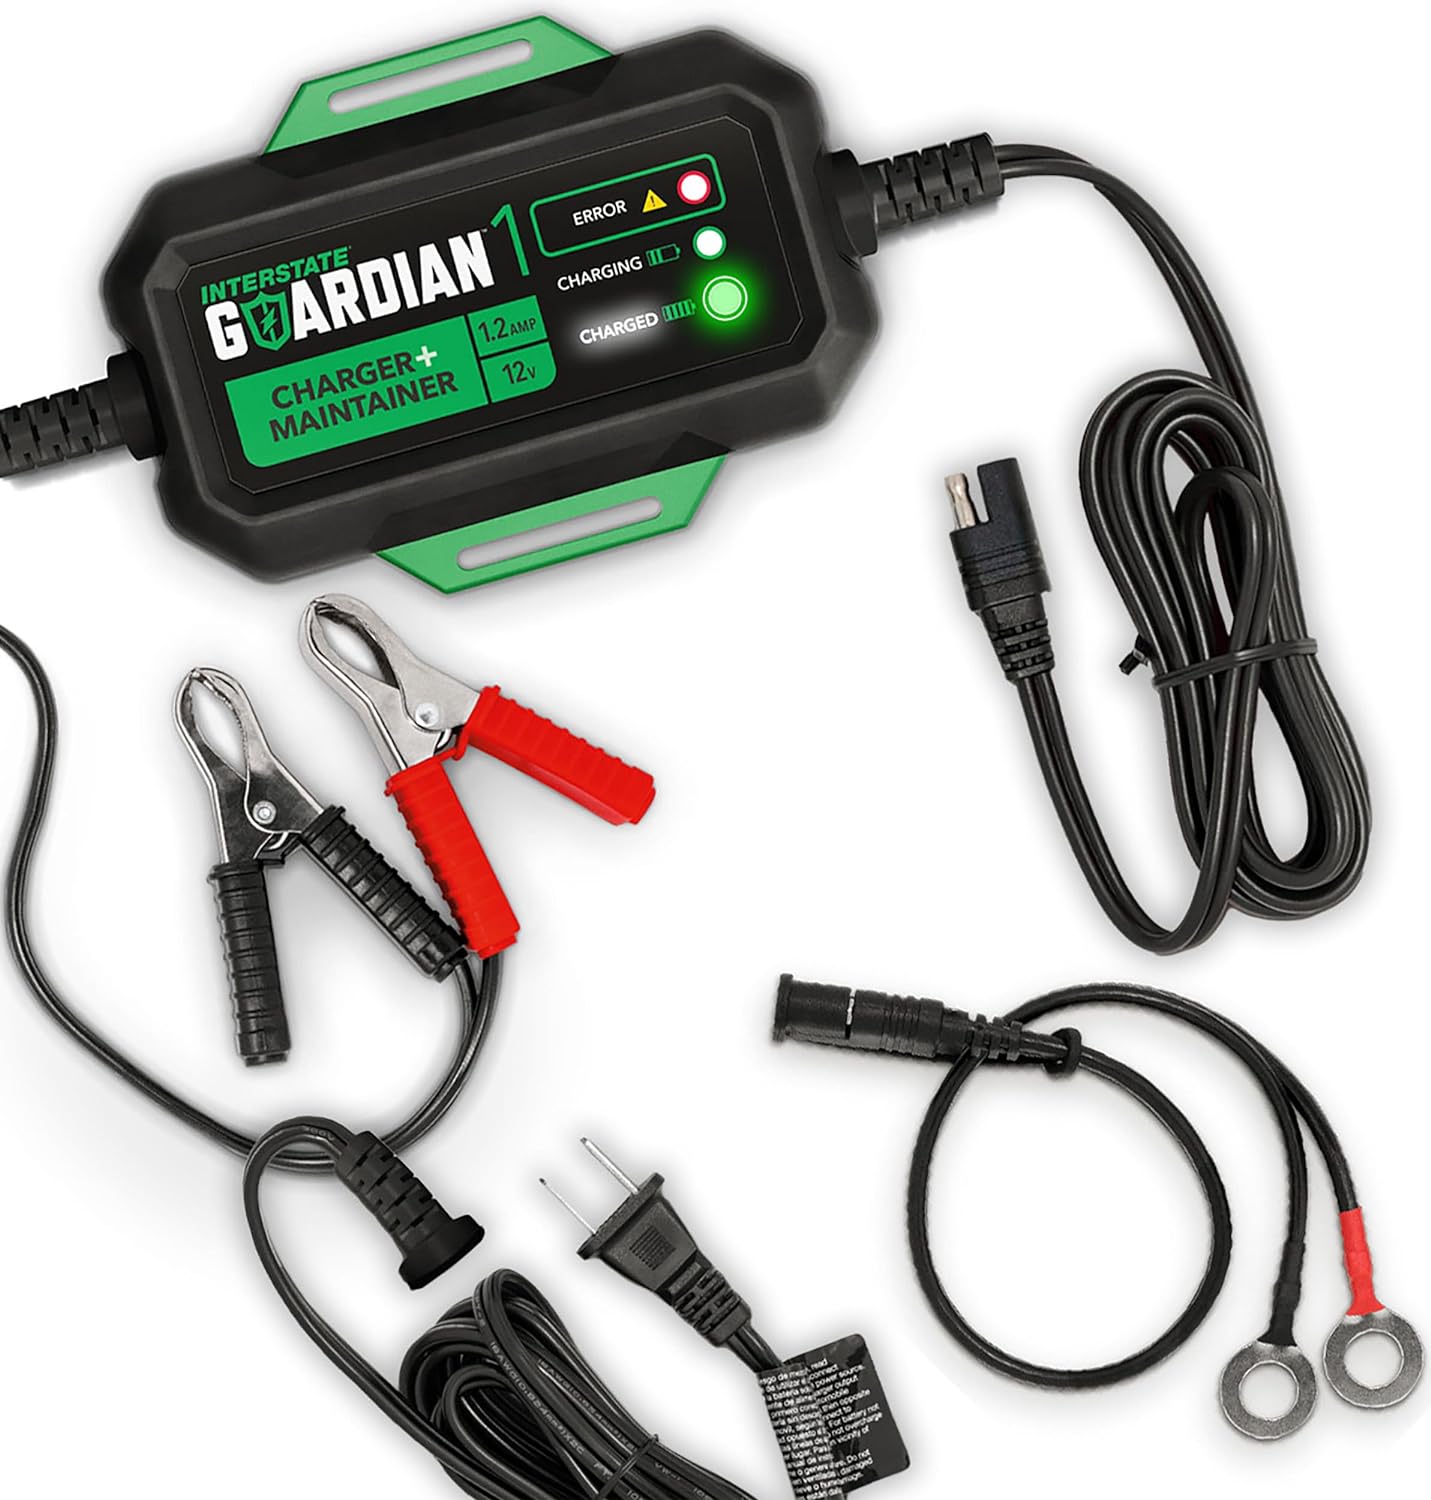 Interstate Batteries 12V Battery Charger and Maintainer (12V, 1.2A) Portable, Automatic, Trickle Charging for Automotive, AGM, Flooded, Gel, Lead-Acid, Powersports (CHGIB12) - Interstate Batteries 12V Battery Charger Review